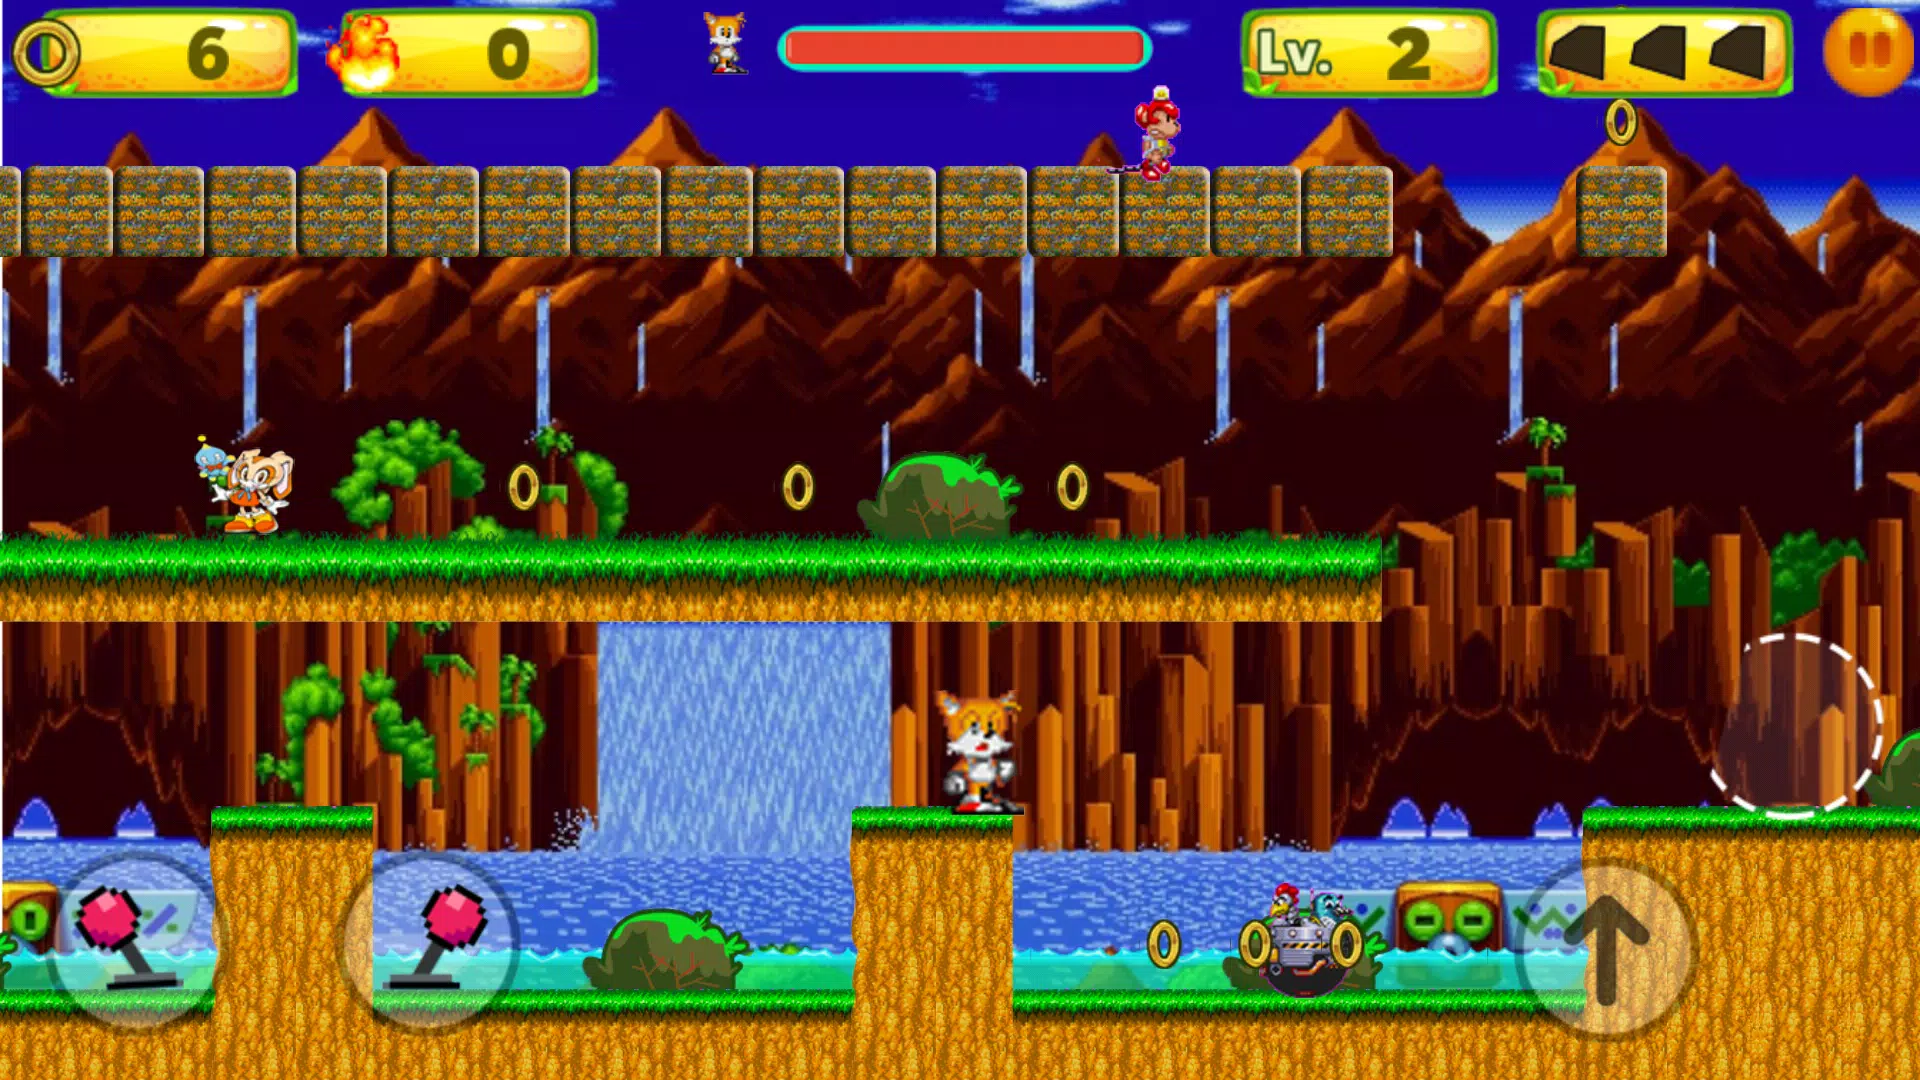 Tails Adventures Super Ring APK (Android Game) - Free Download